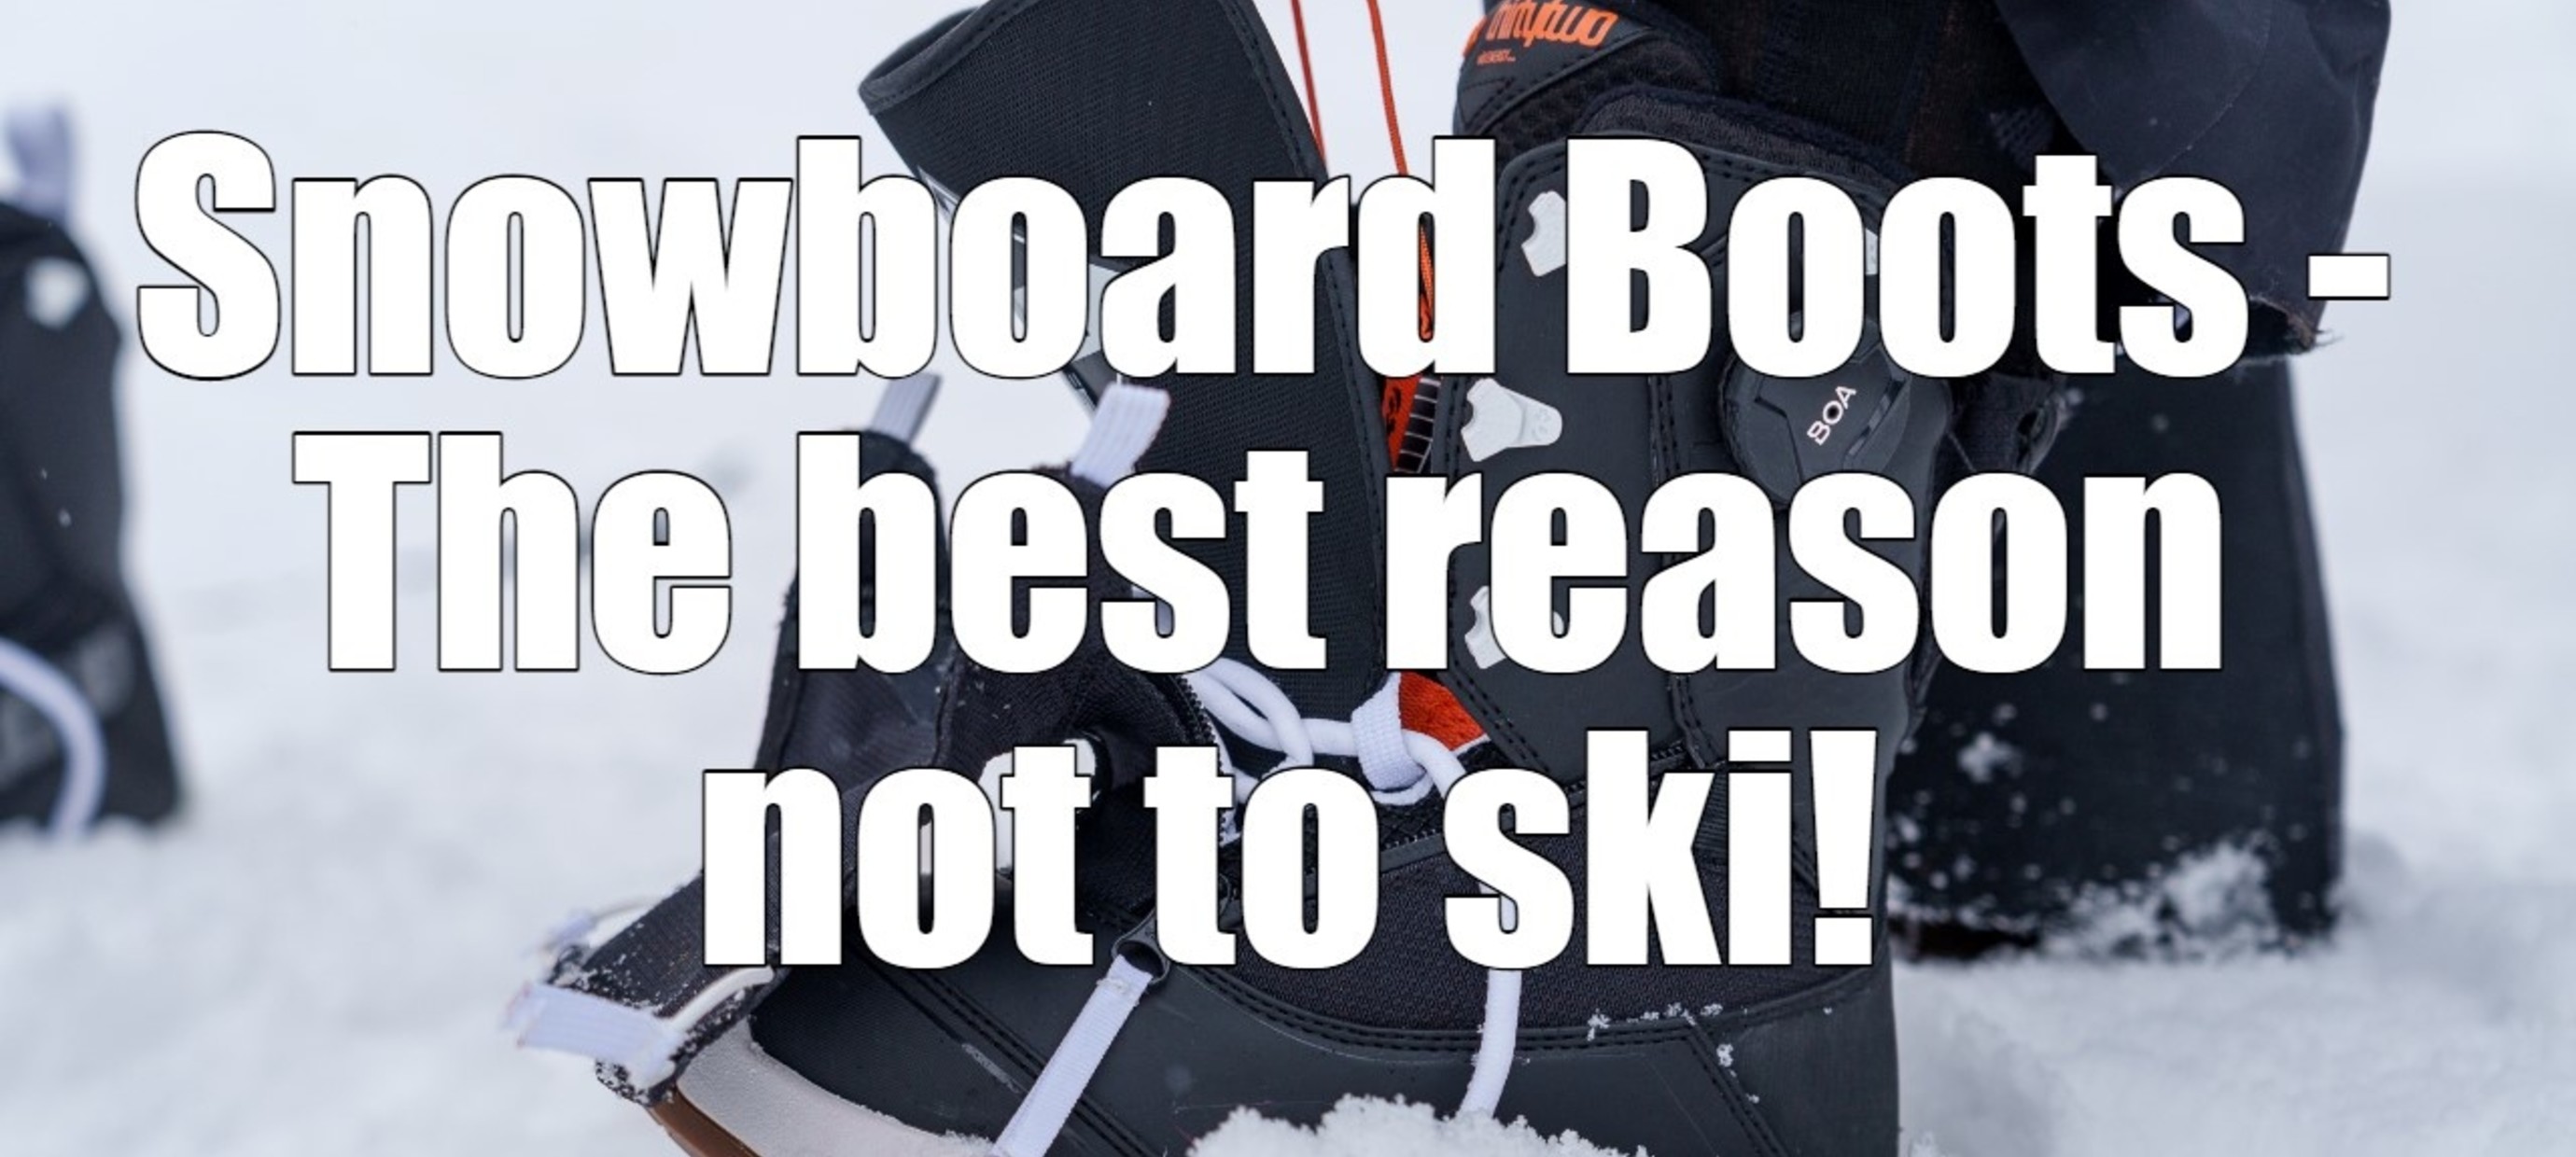 Snowboard boots - The best reason not to ski!